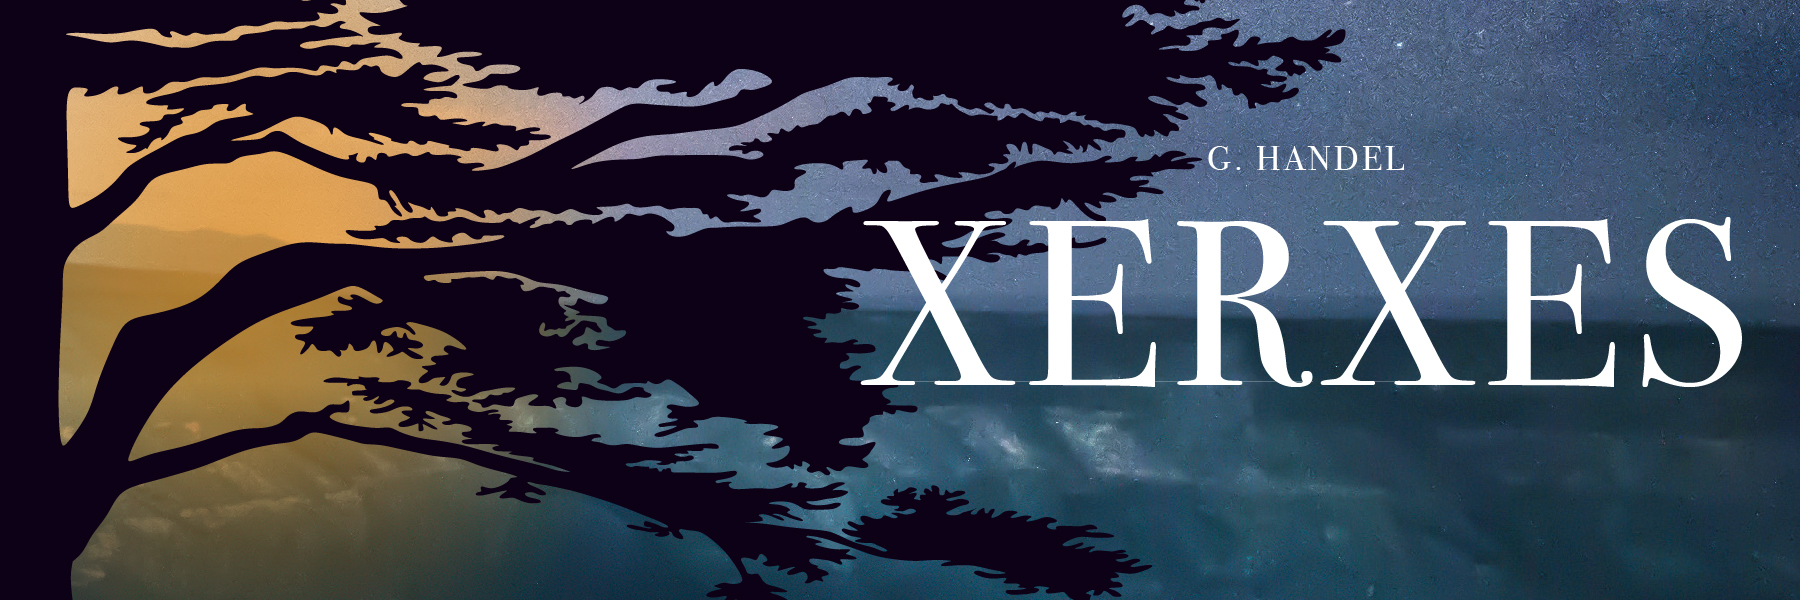 Title Art for Xerxes, written by G. Handel. Evening image of a coast with cliffs, a boat approaching the shore, and a large tree silhouette in the foreground.